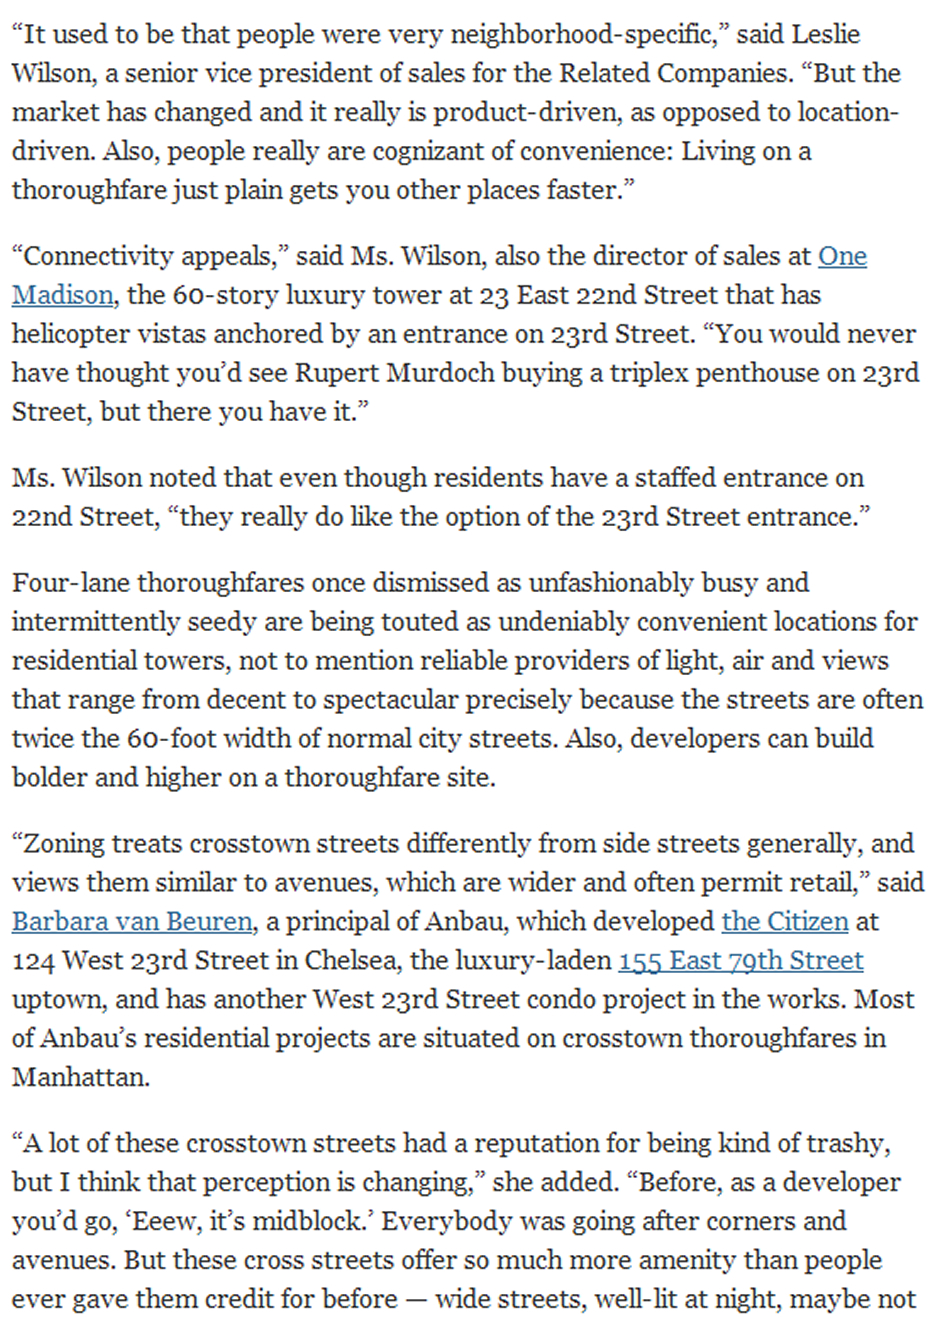 New Apartments on Manhattan's Busy Crosstown Streets part 3